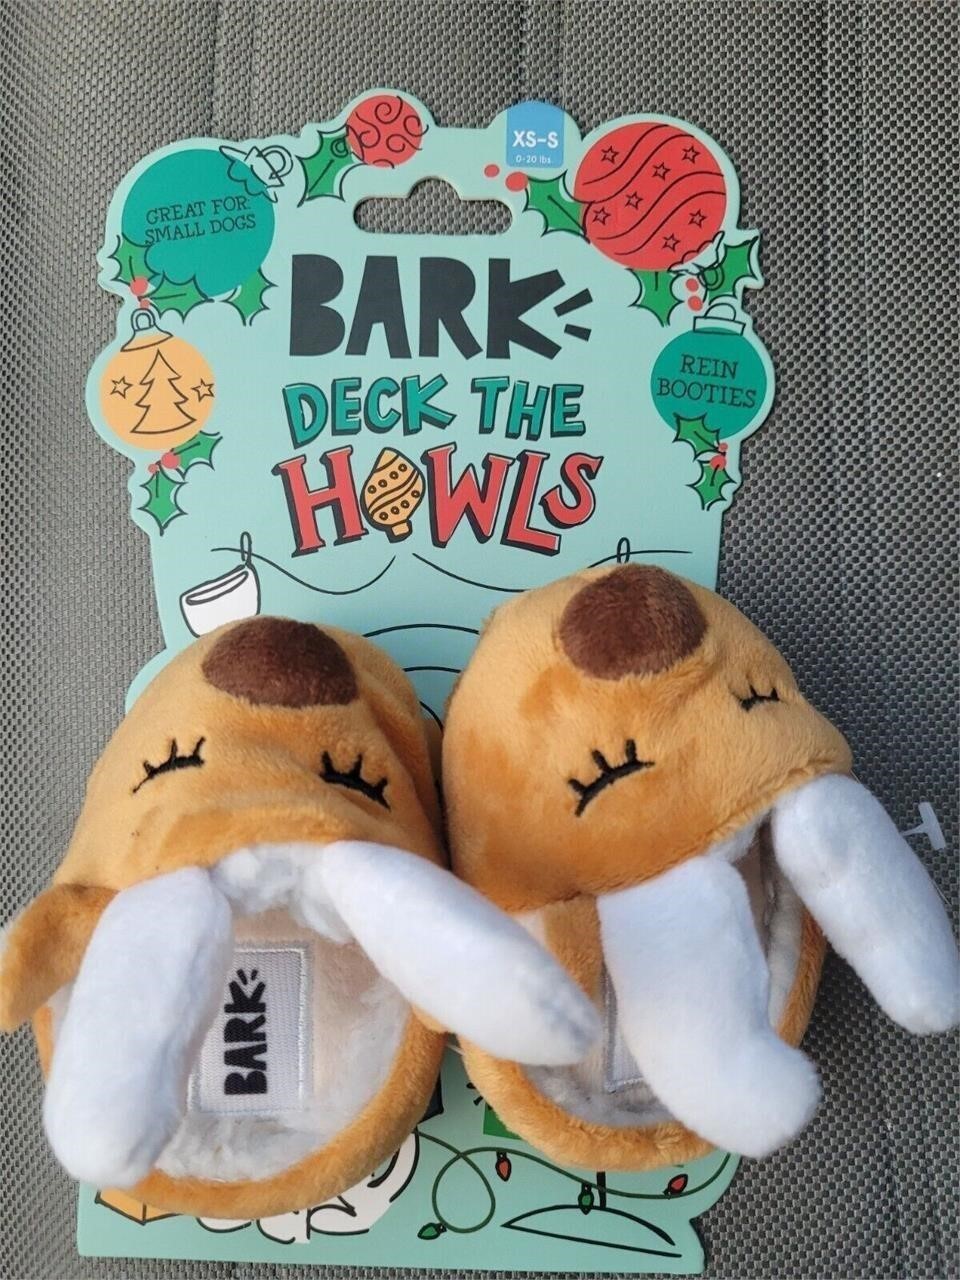 BARK Slippers Holiday Dog Toy - Rein Booties